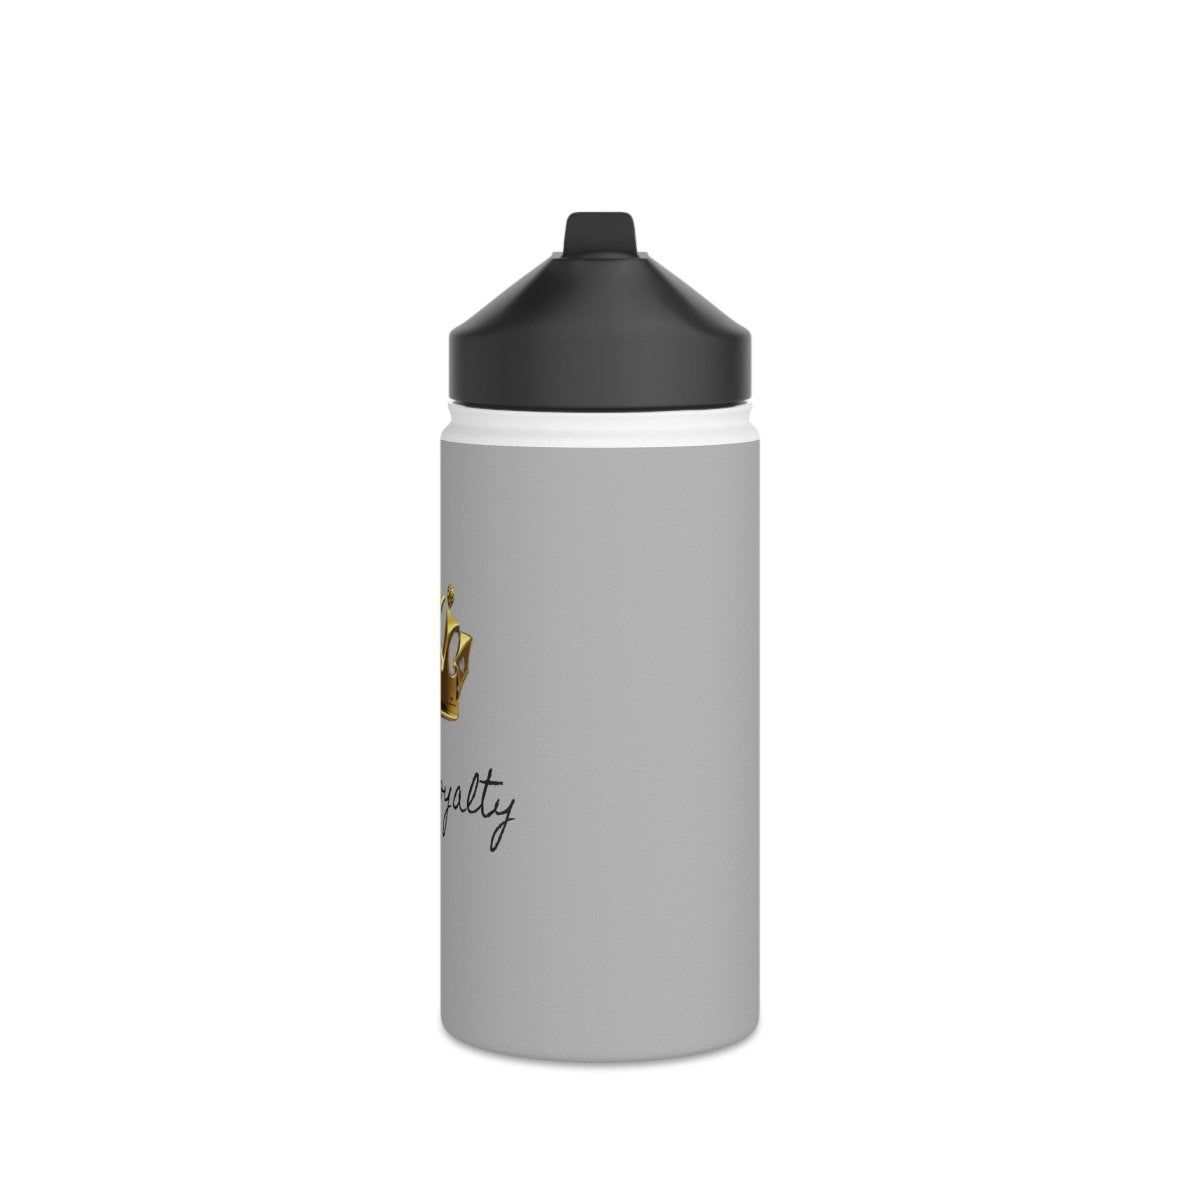 Royal Crown Stainless Steel Water Bottle - I Am Royalty (Standard Lid - Light Gray) - DarzyStore